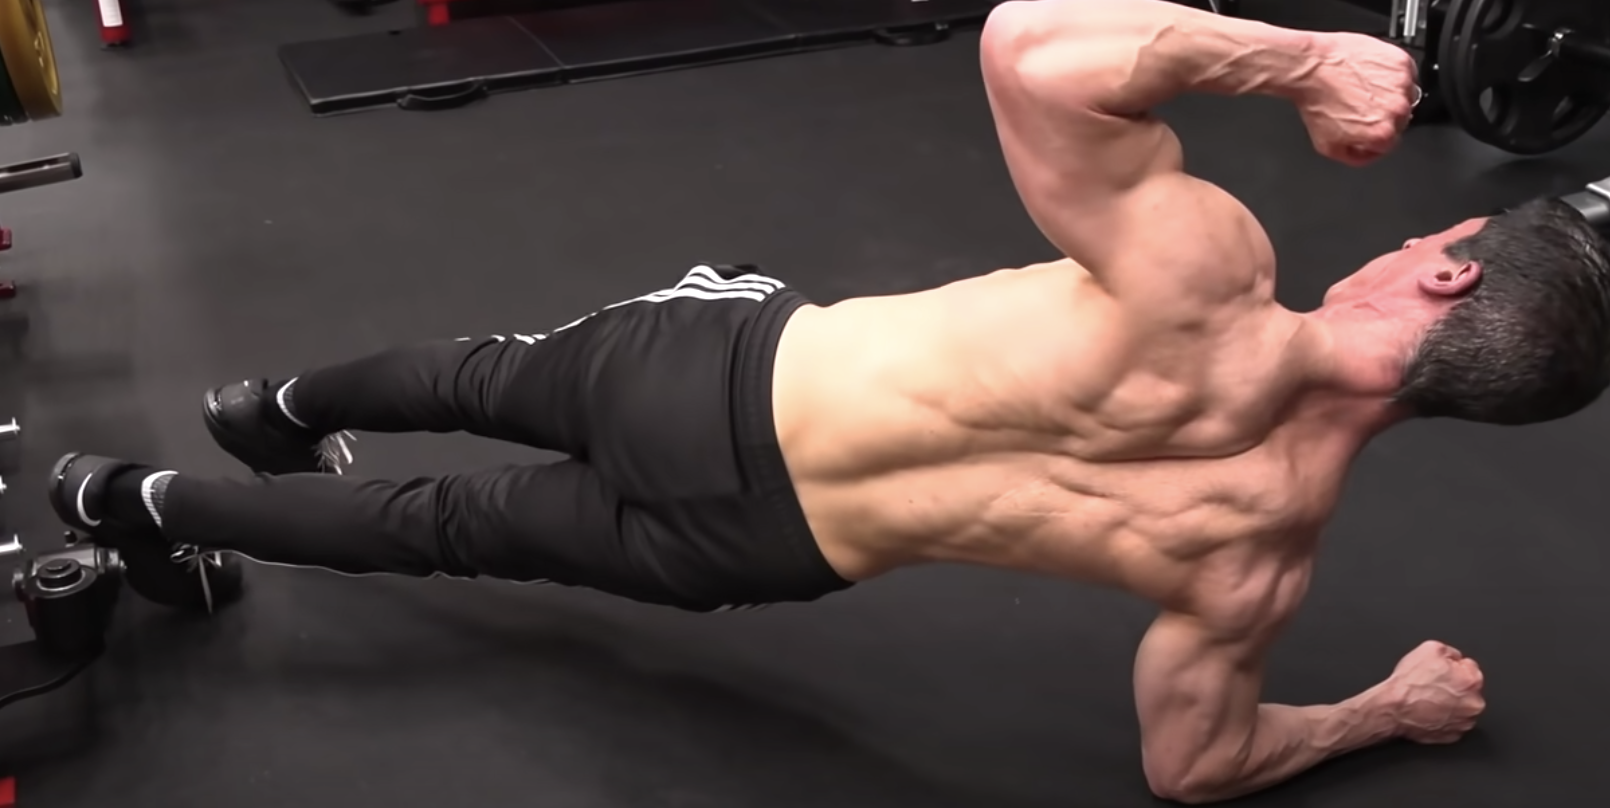 Cobra Pushup: Strengthen Your Upper Body and Core